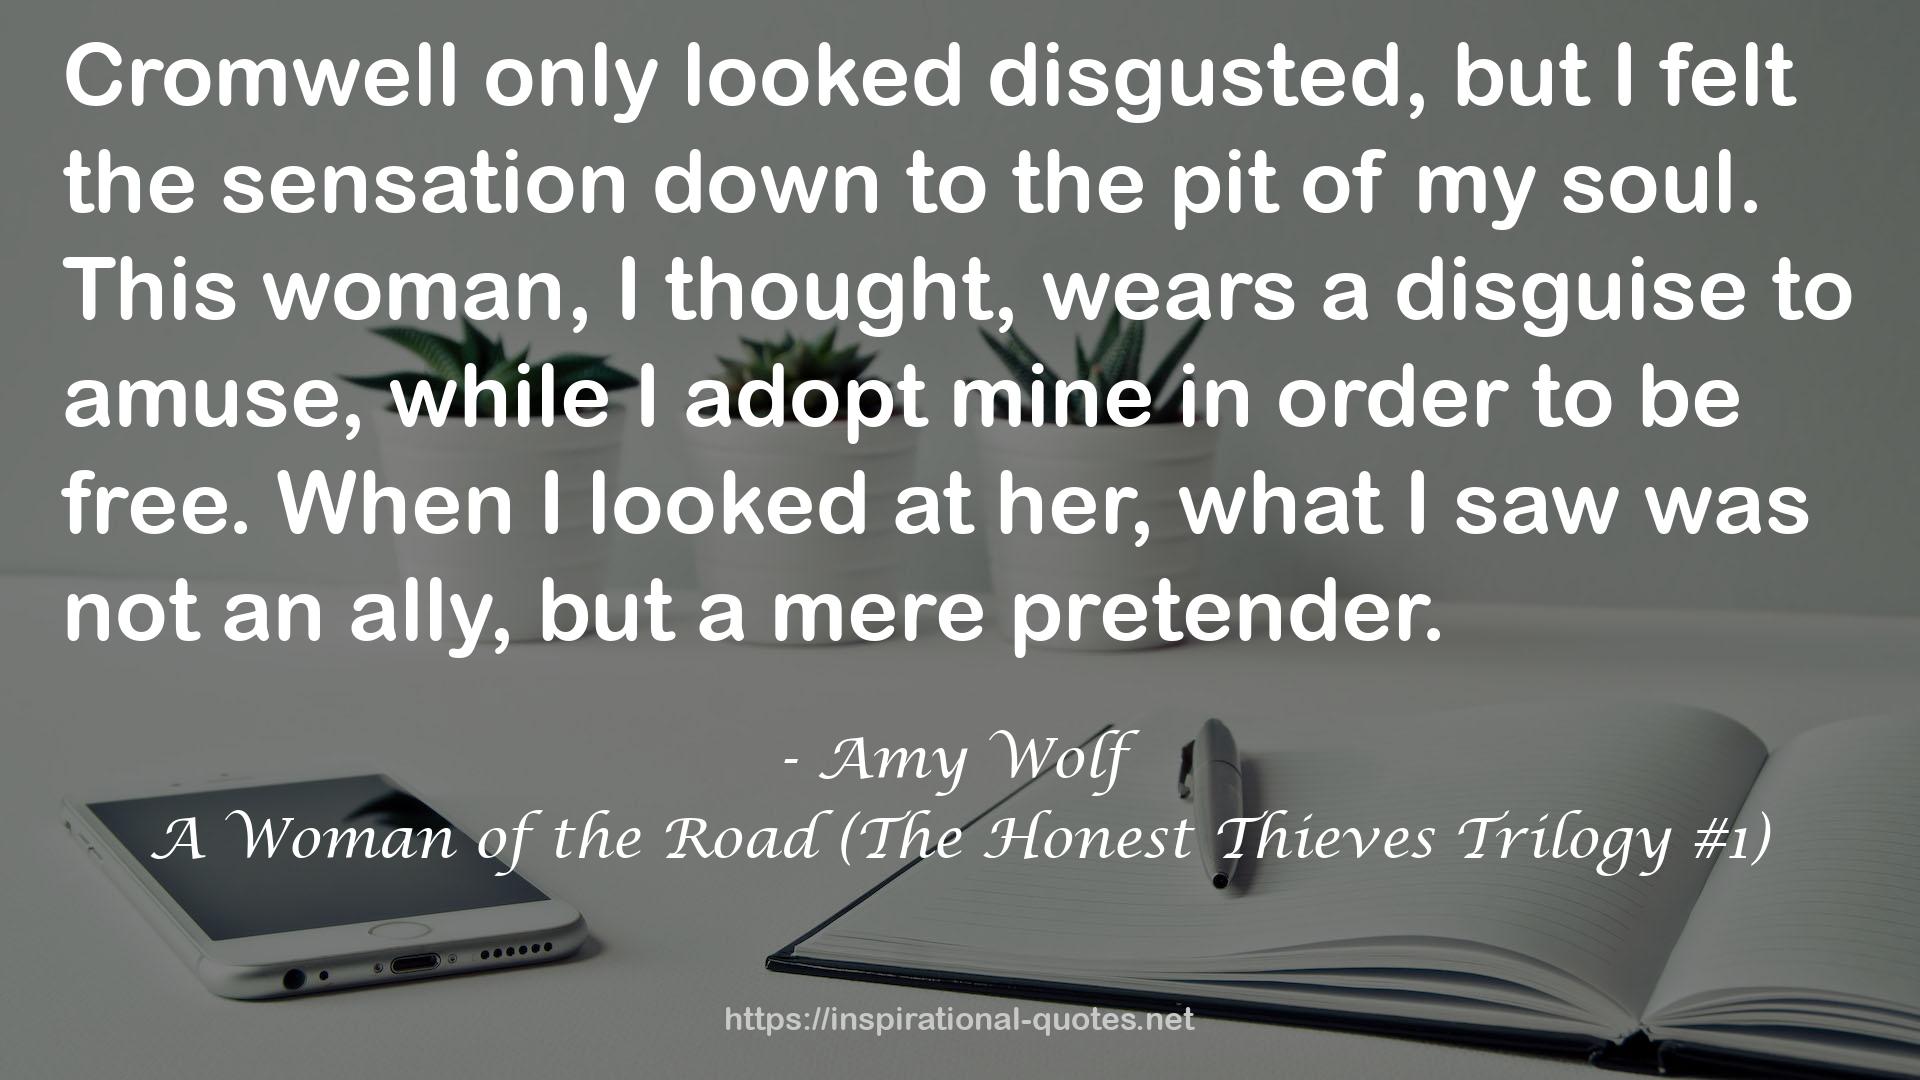 A Woman of the Road (The Honest Thieves Trilogy #1) QUOTES